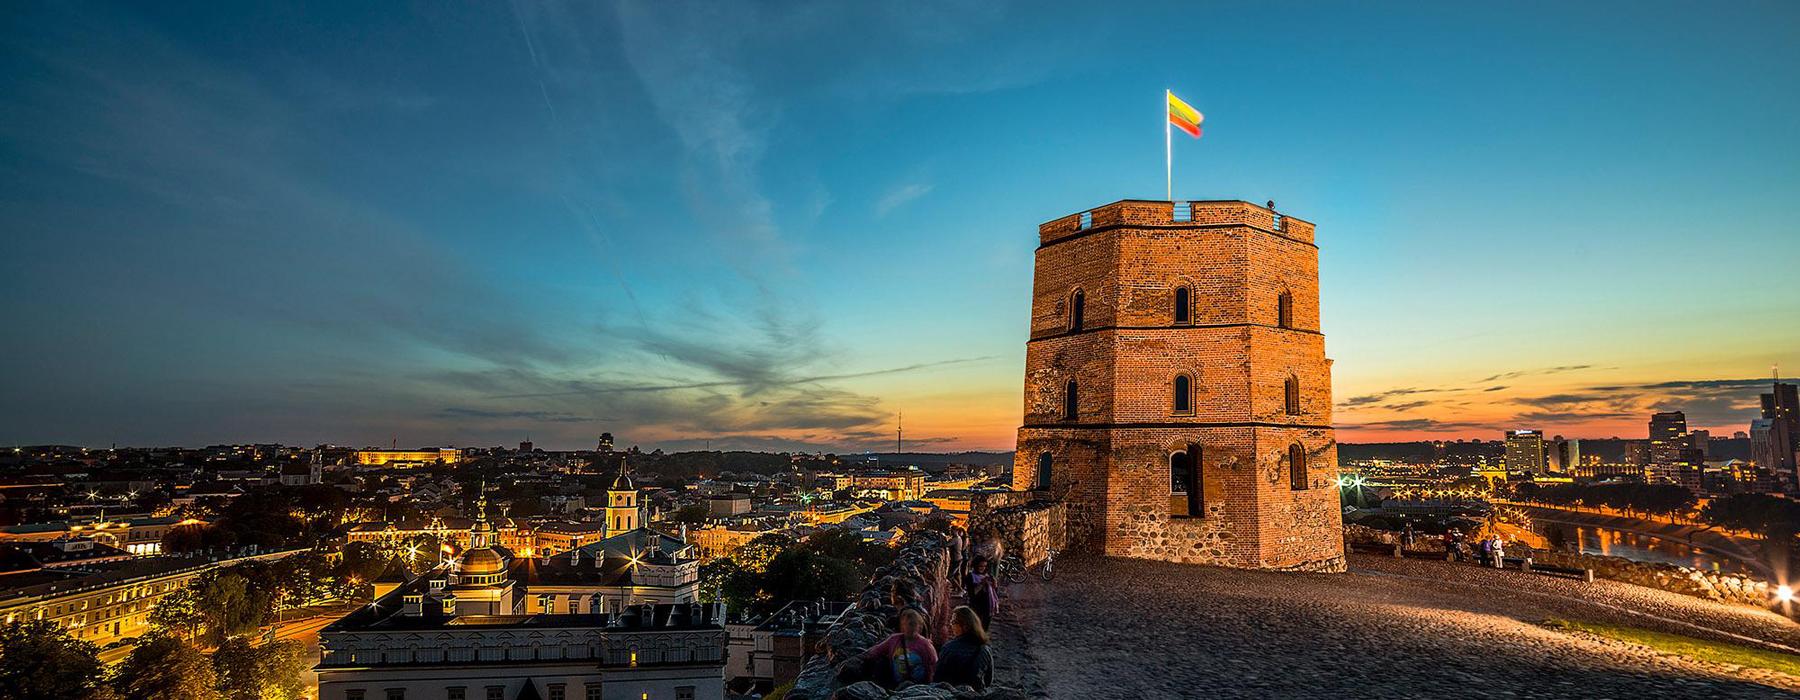 Nightime View Of Vilnius Lithuania With Gediminas Castle Tower